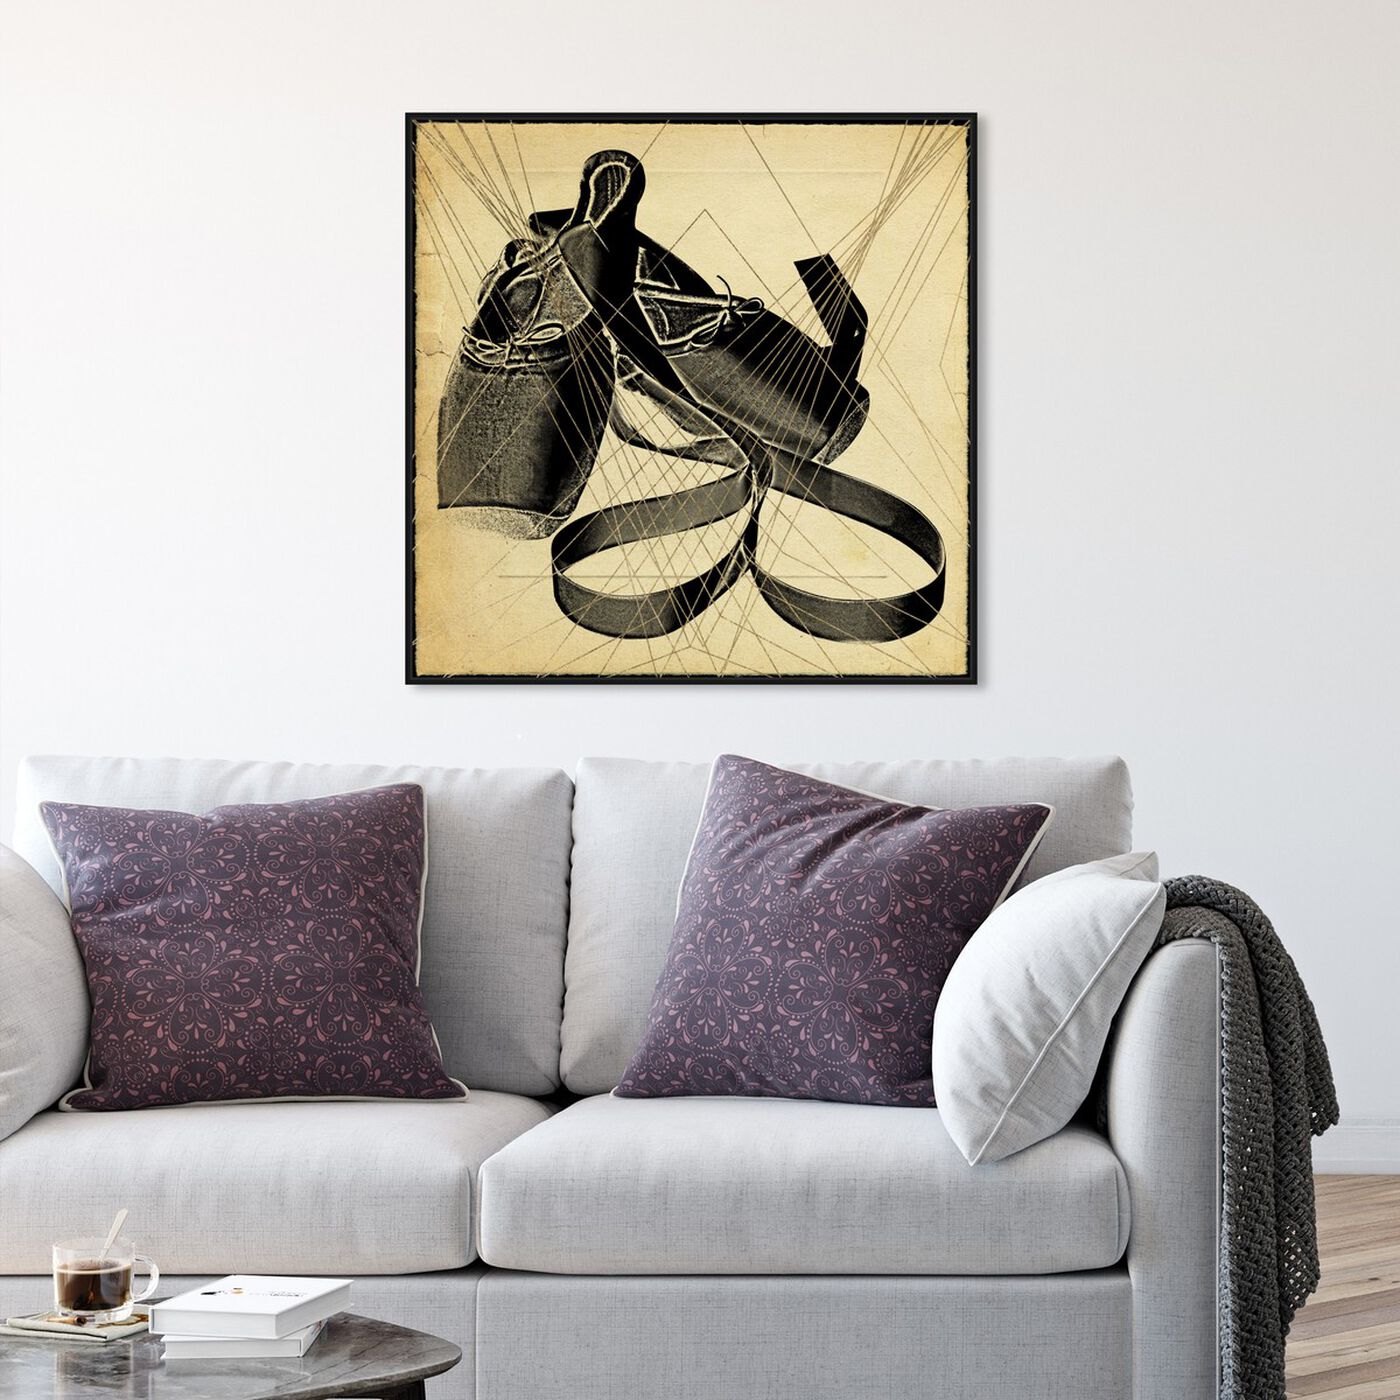 Hanging view of Ballet Shoes Print featuring sports and teams and ballet art.